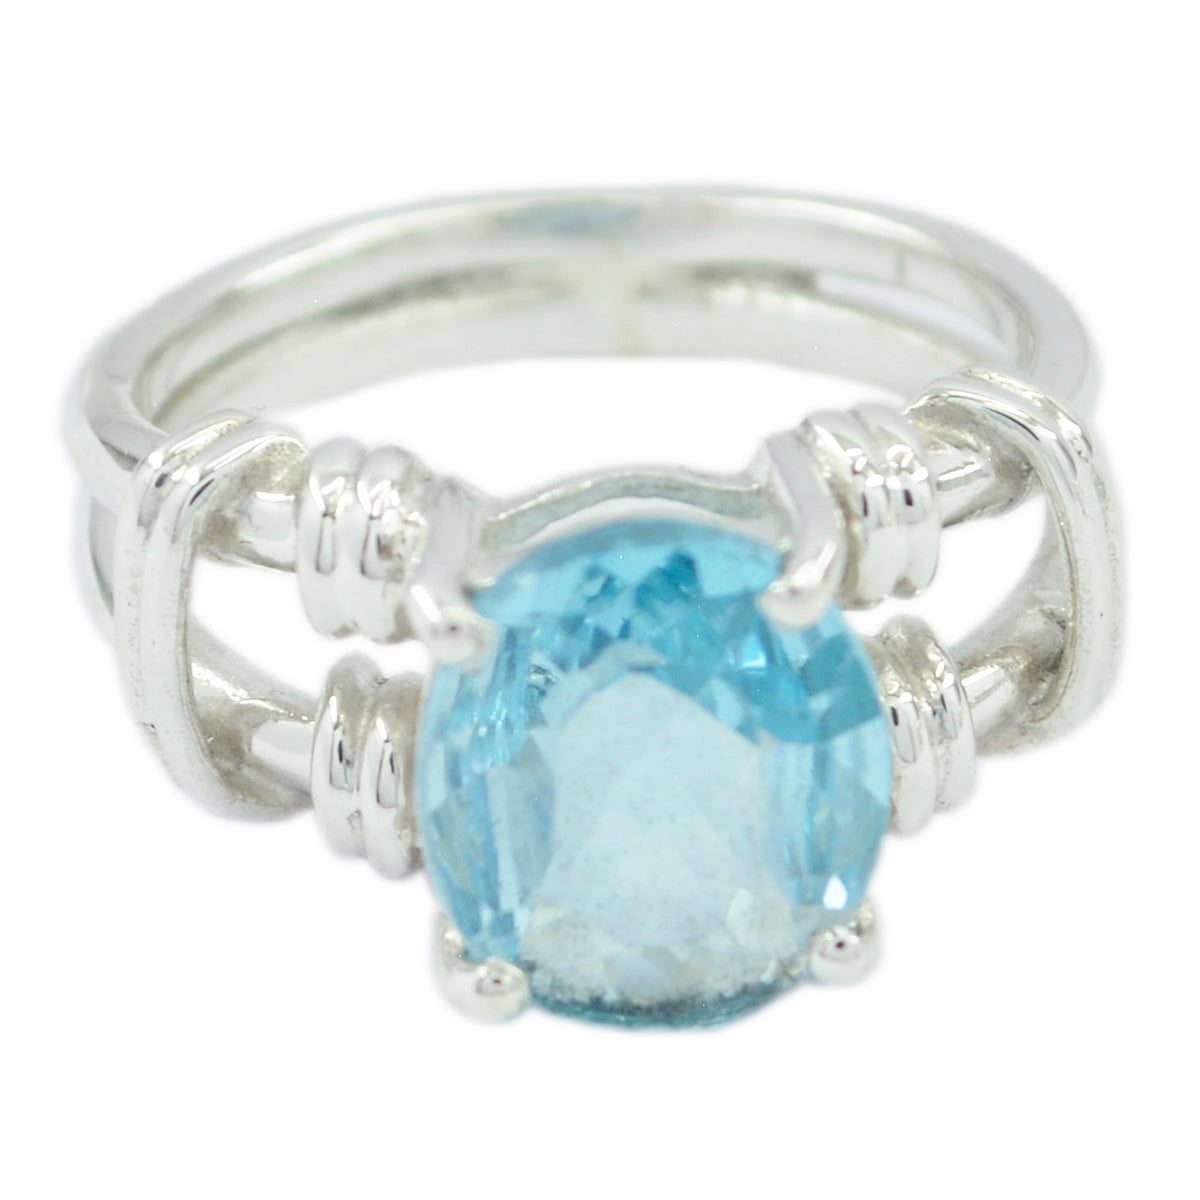 Riyo Excellent Gem Blue Topaz Solid Silver Rings Jewelry Making Kit